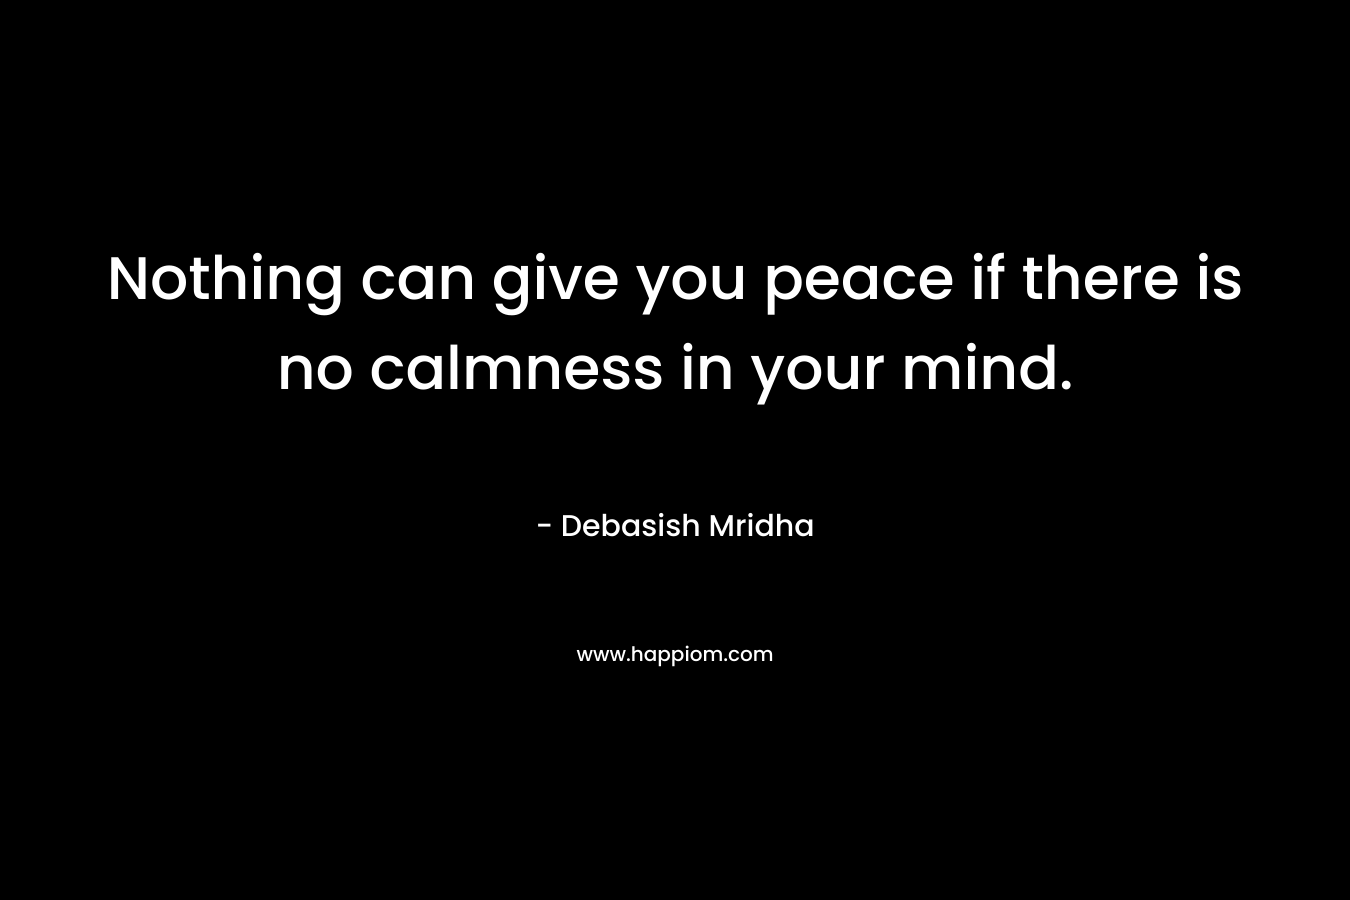 Nothing can give you peace if there is no calmness in your mind.